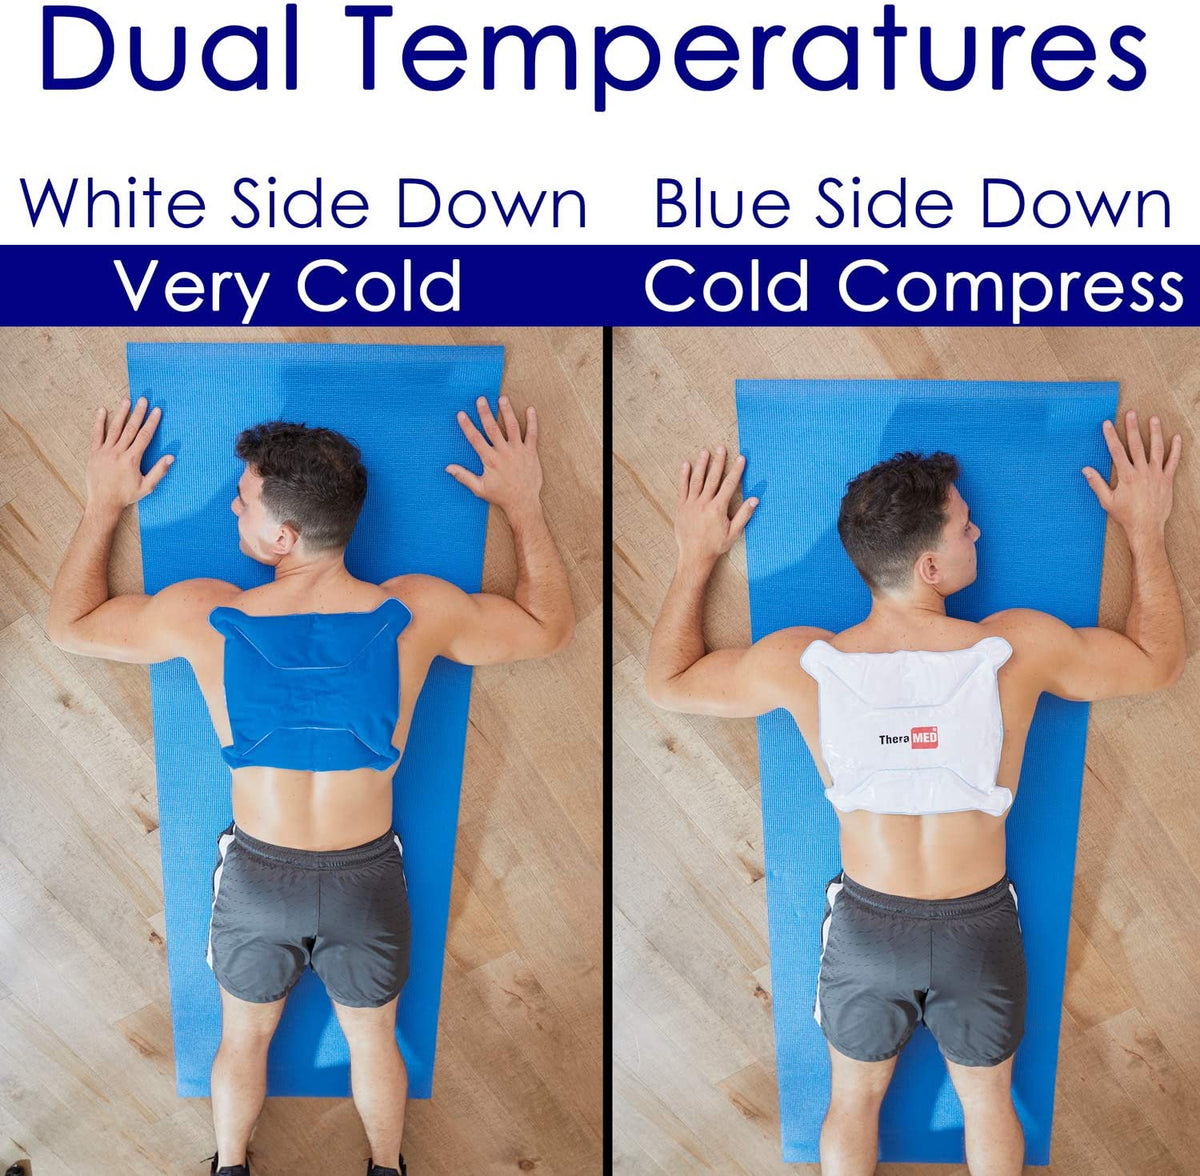 Coldest Extra Large Ice Pack for Back and Full Body - Cold Compress for Pain Relief, Ice Blanket for Sleeping or Ice Pad Physical Therapy - Folds